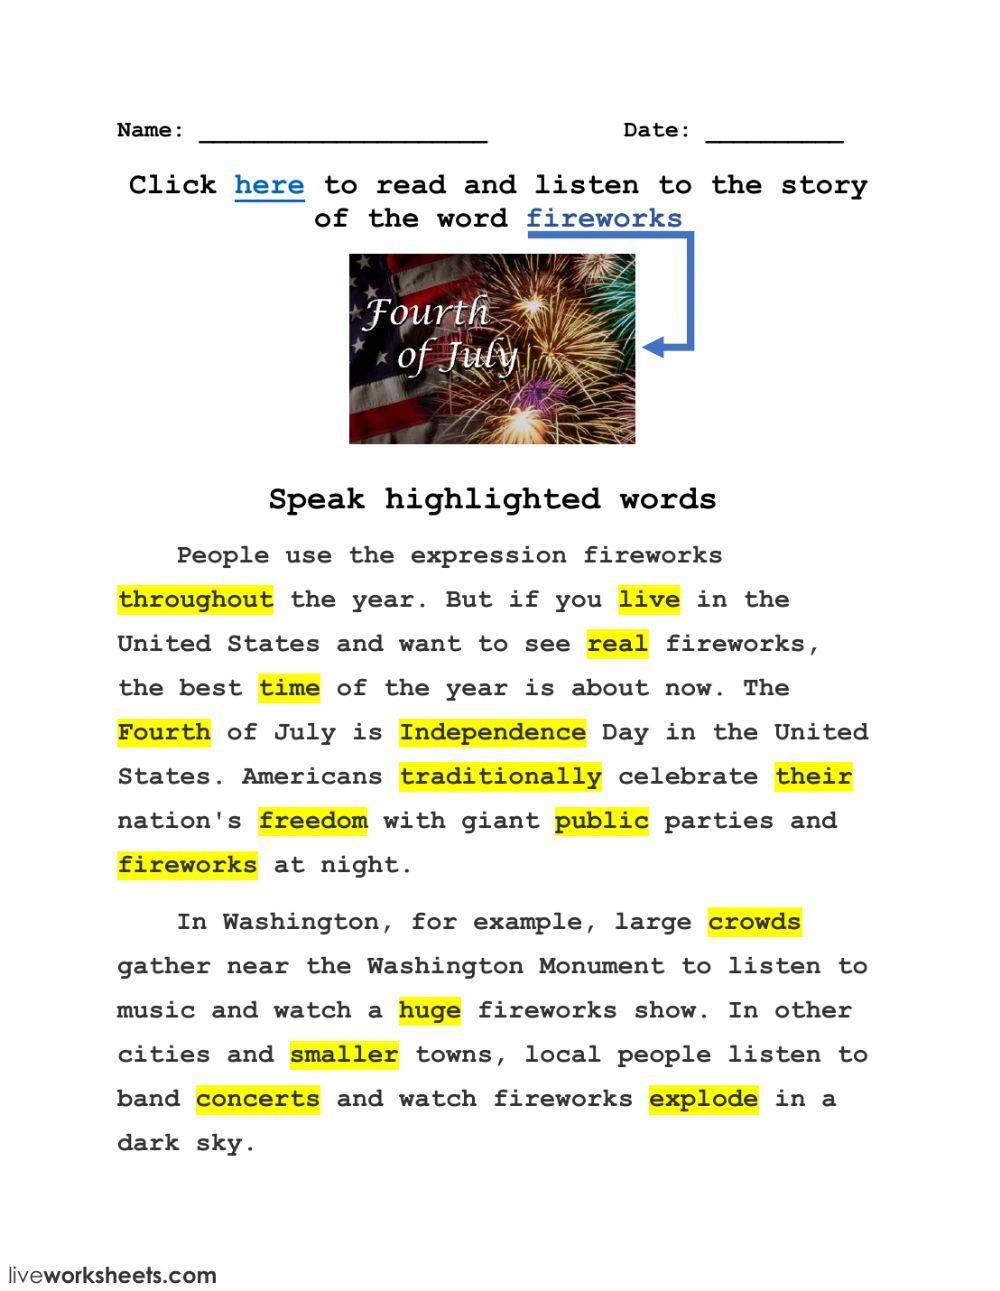 Word FIREWORKS and its story-5